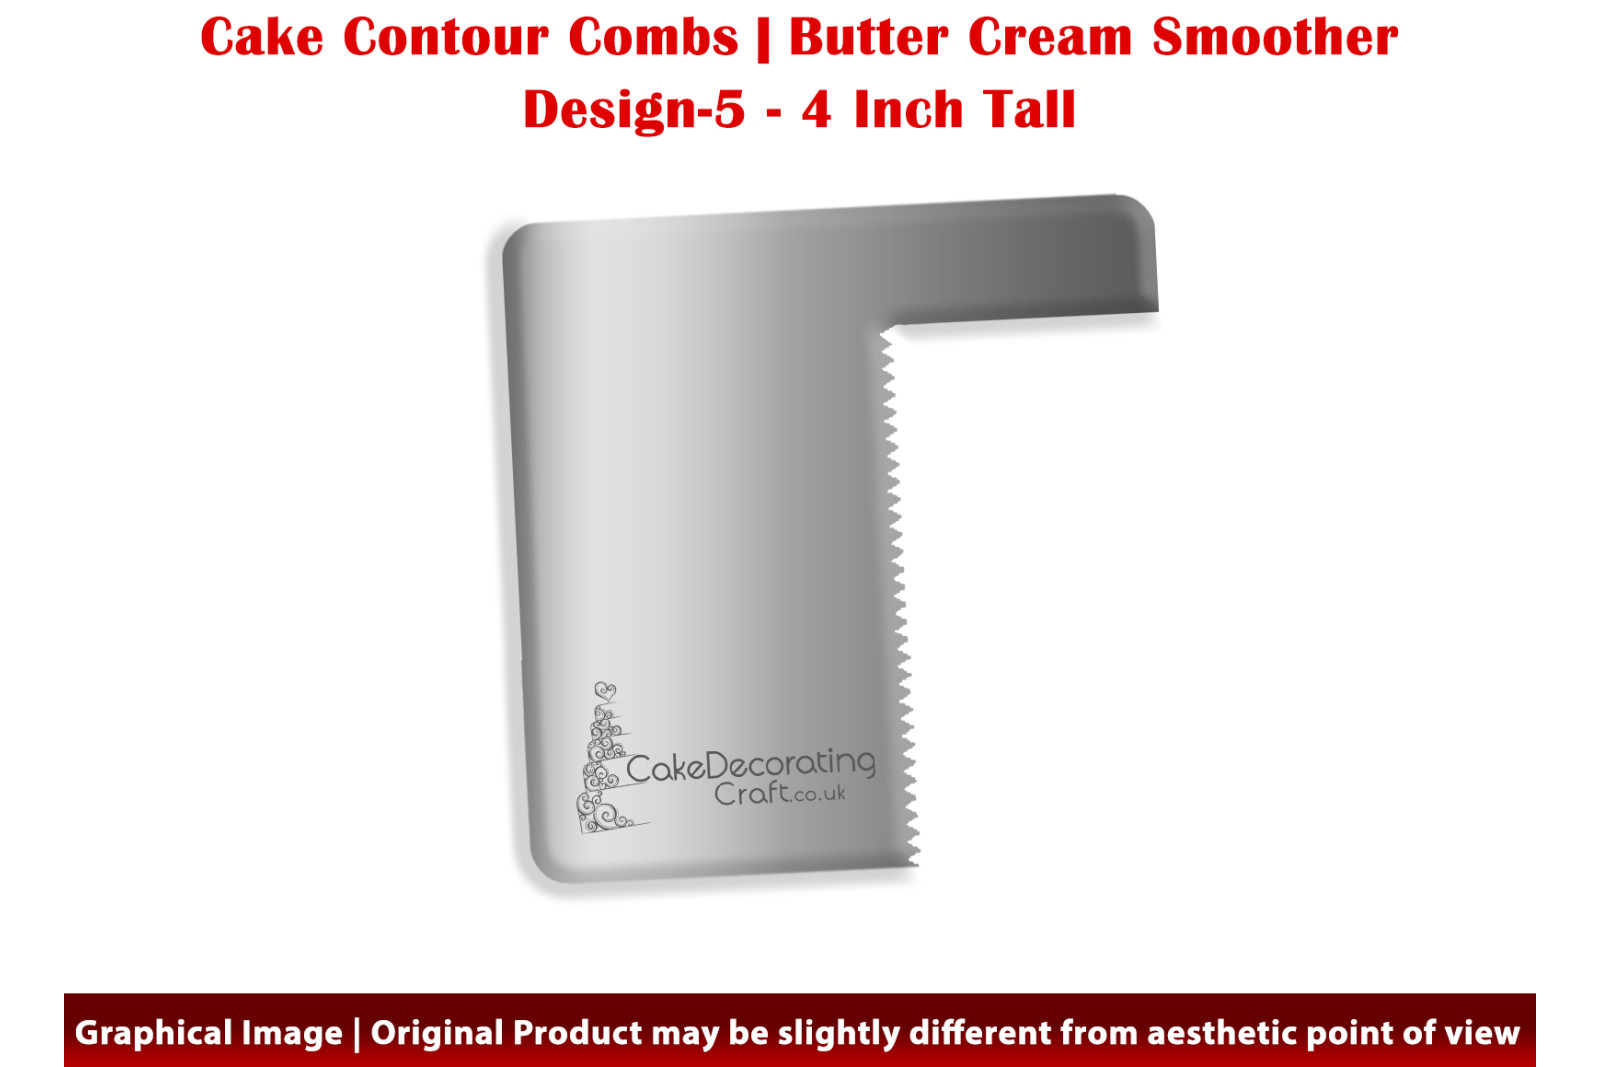 Zig Zag | Design 5 | 4 Inch | Cake Decorating Craft | Cake Contour Combs | Smoothing | Metal Spreader | Butter Cream Smoothing | Genius Tool